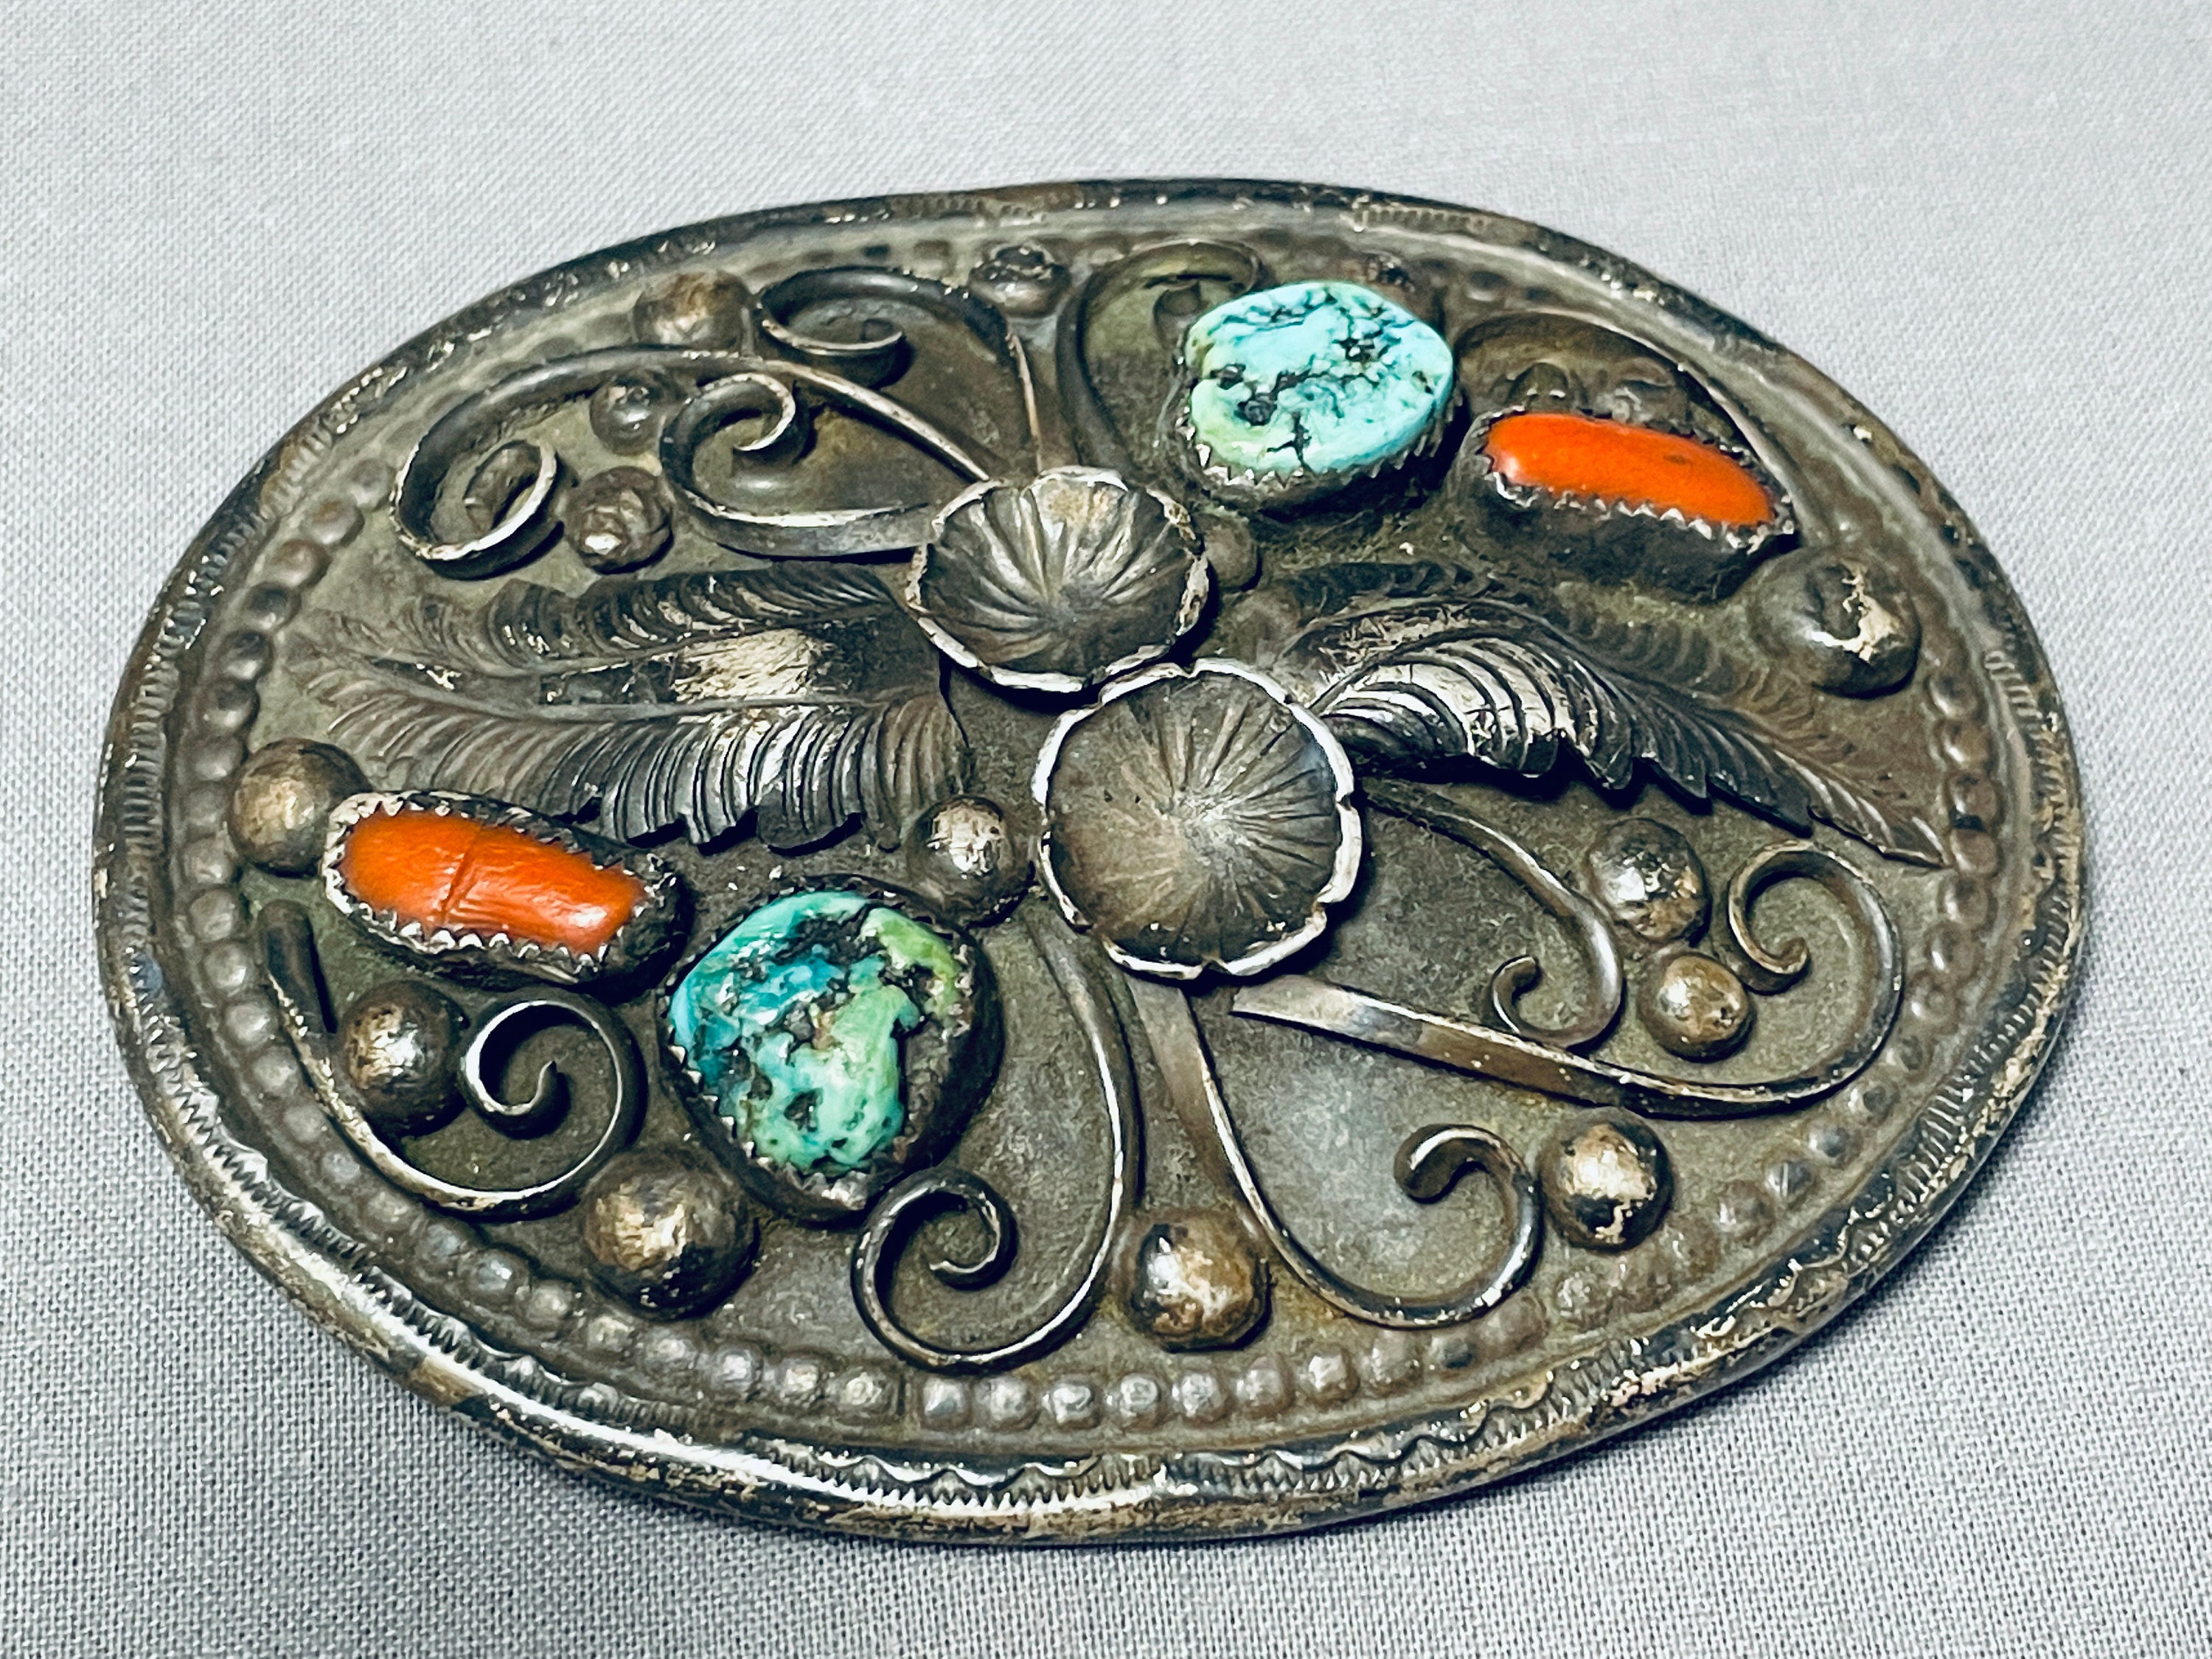 Accessories Belts & Braces Belt Buckles Vintage Sterling Silver Navajo Belt Buckle Signed Turquoise Coral Inlay Signed HB Native American Indian Silver Turquoise Coral Buckle 